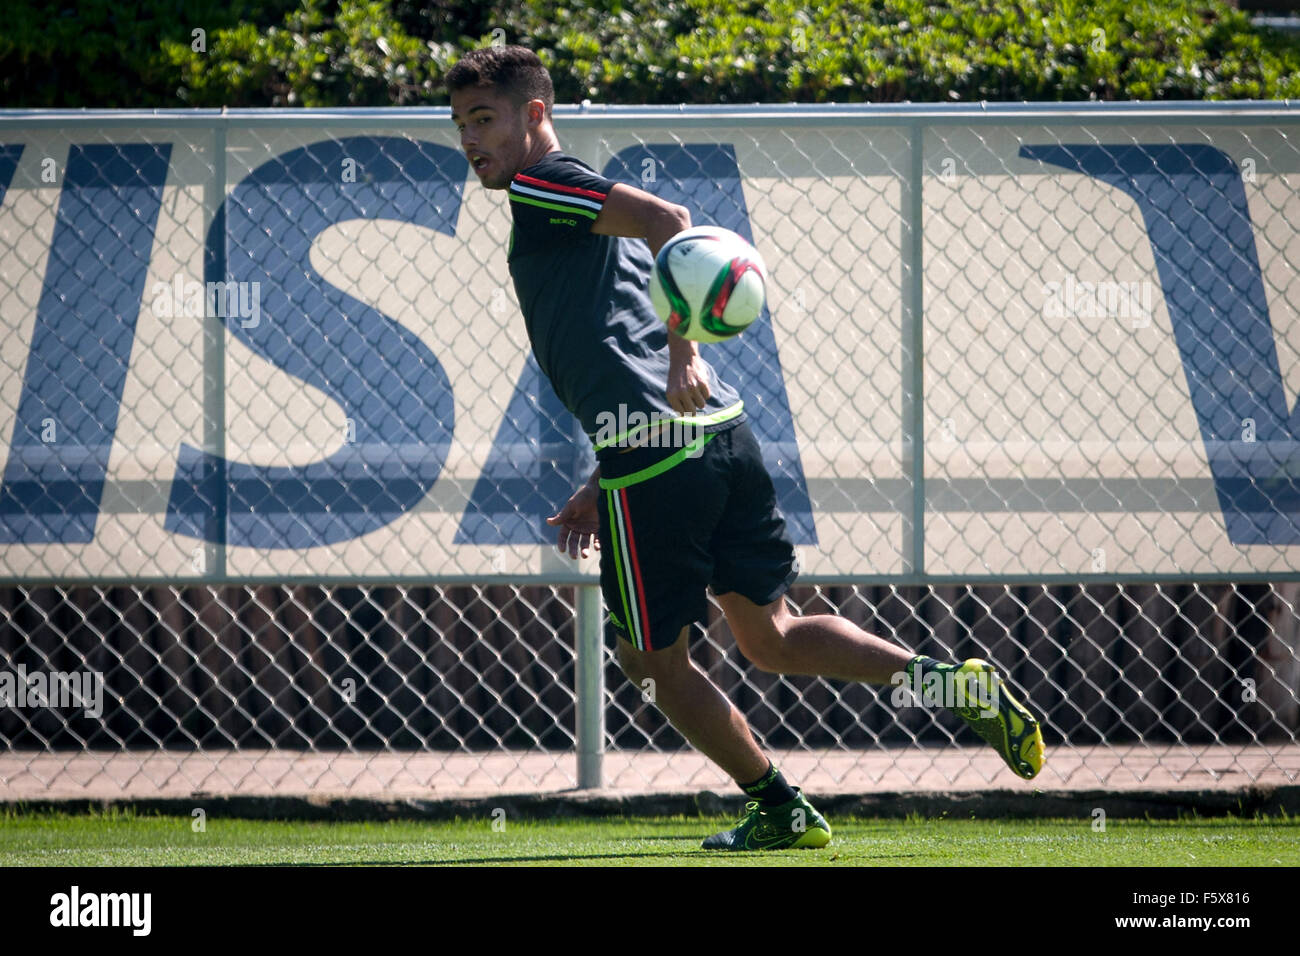 Mexico City, Mexico. 9th Nov, 2015. Mexico's national soccer team player Diego Reyes takes part in a training session in Mexico City, capital of Mexico, on Nov. 9, 2015. Mexico will play against El Salvador on Nov. 13, as part of the preliminary competition towards 2018 FIFA World Cup. © Pedro Mera/Xinhua/Alamy Live News Stock Photo